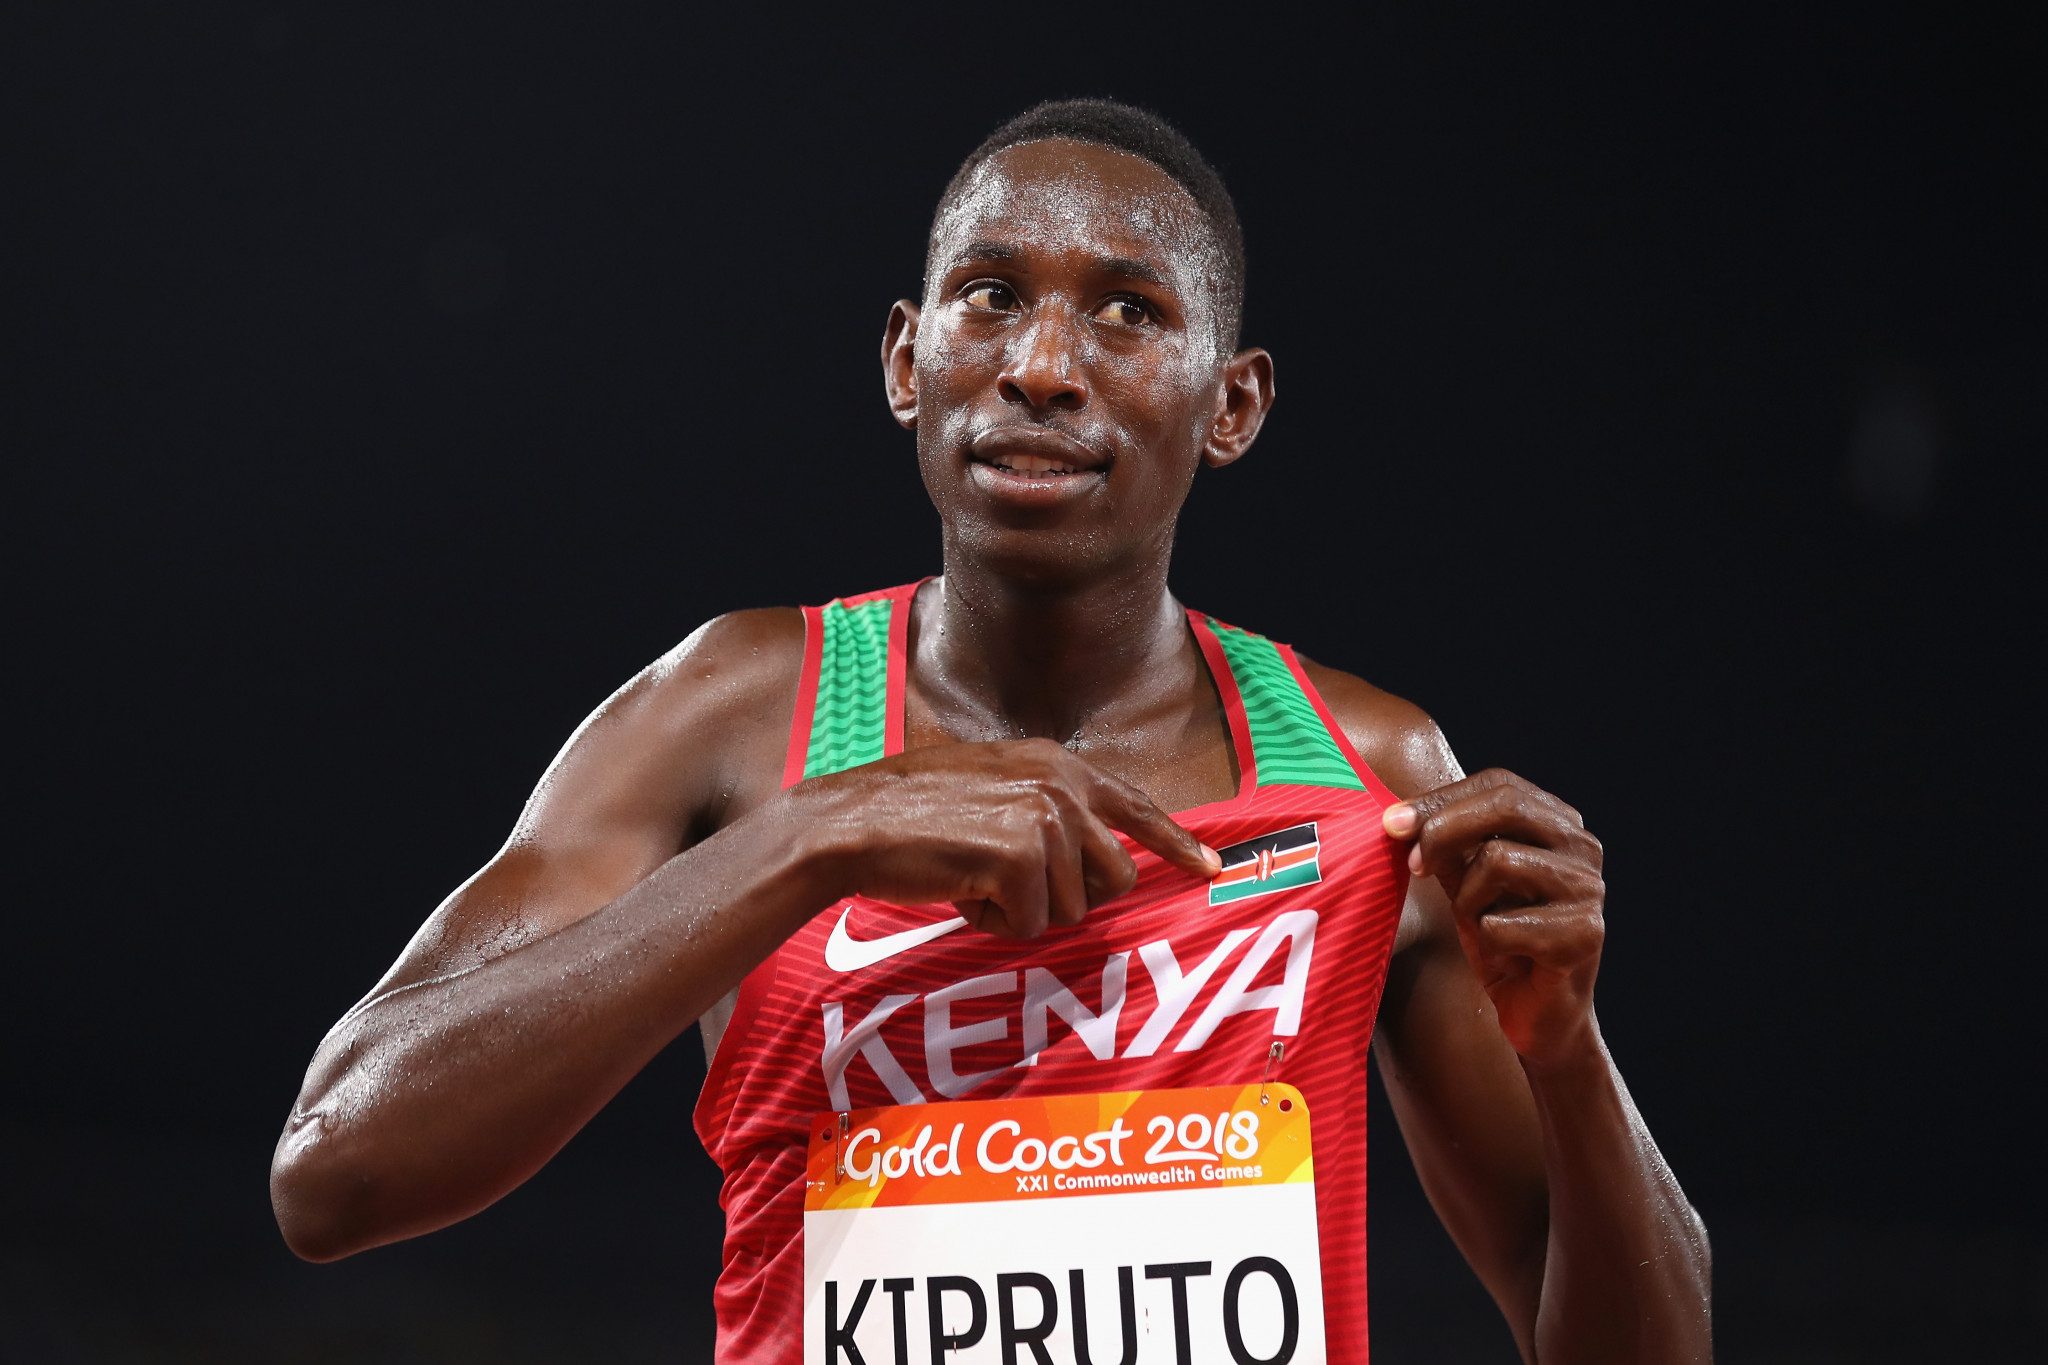 Olympic champion Conseslus Kipruto has the chance to win a second consecutive Commonwealth Games gold medal after triumphing at Gold Coast 2018 ©Getty Images